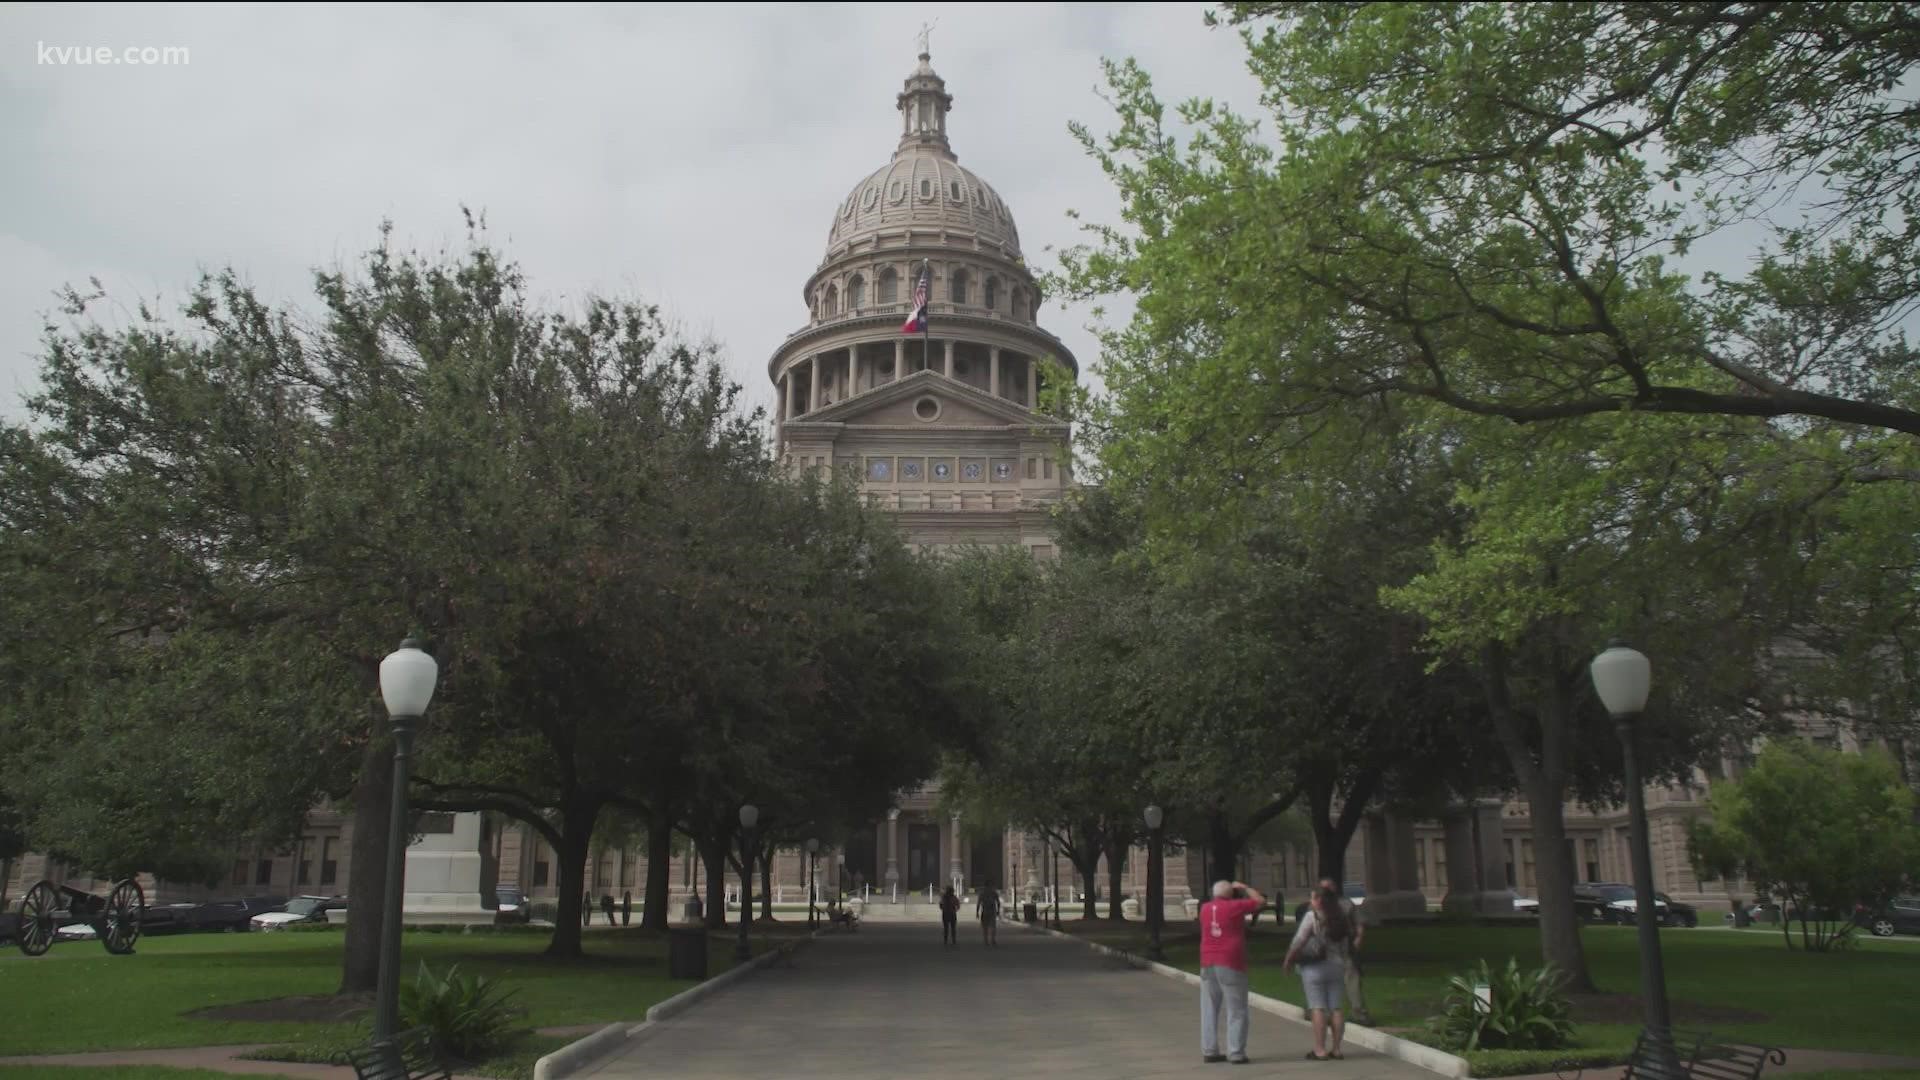 The federal government is exploring its options to challenge Texas' new abortion law. The law bans abortions as early as six weeks into a pregnancy.